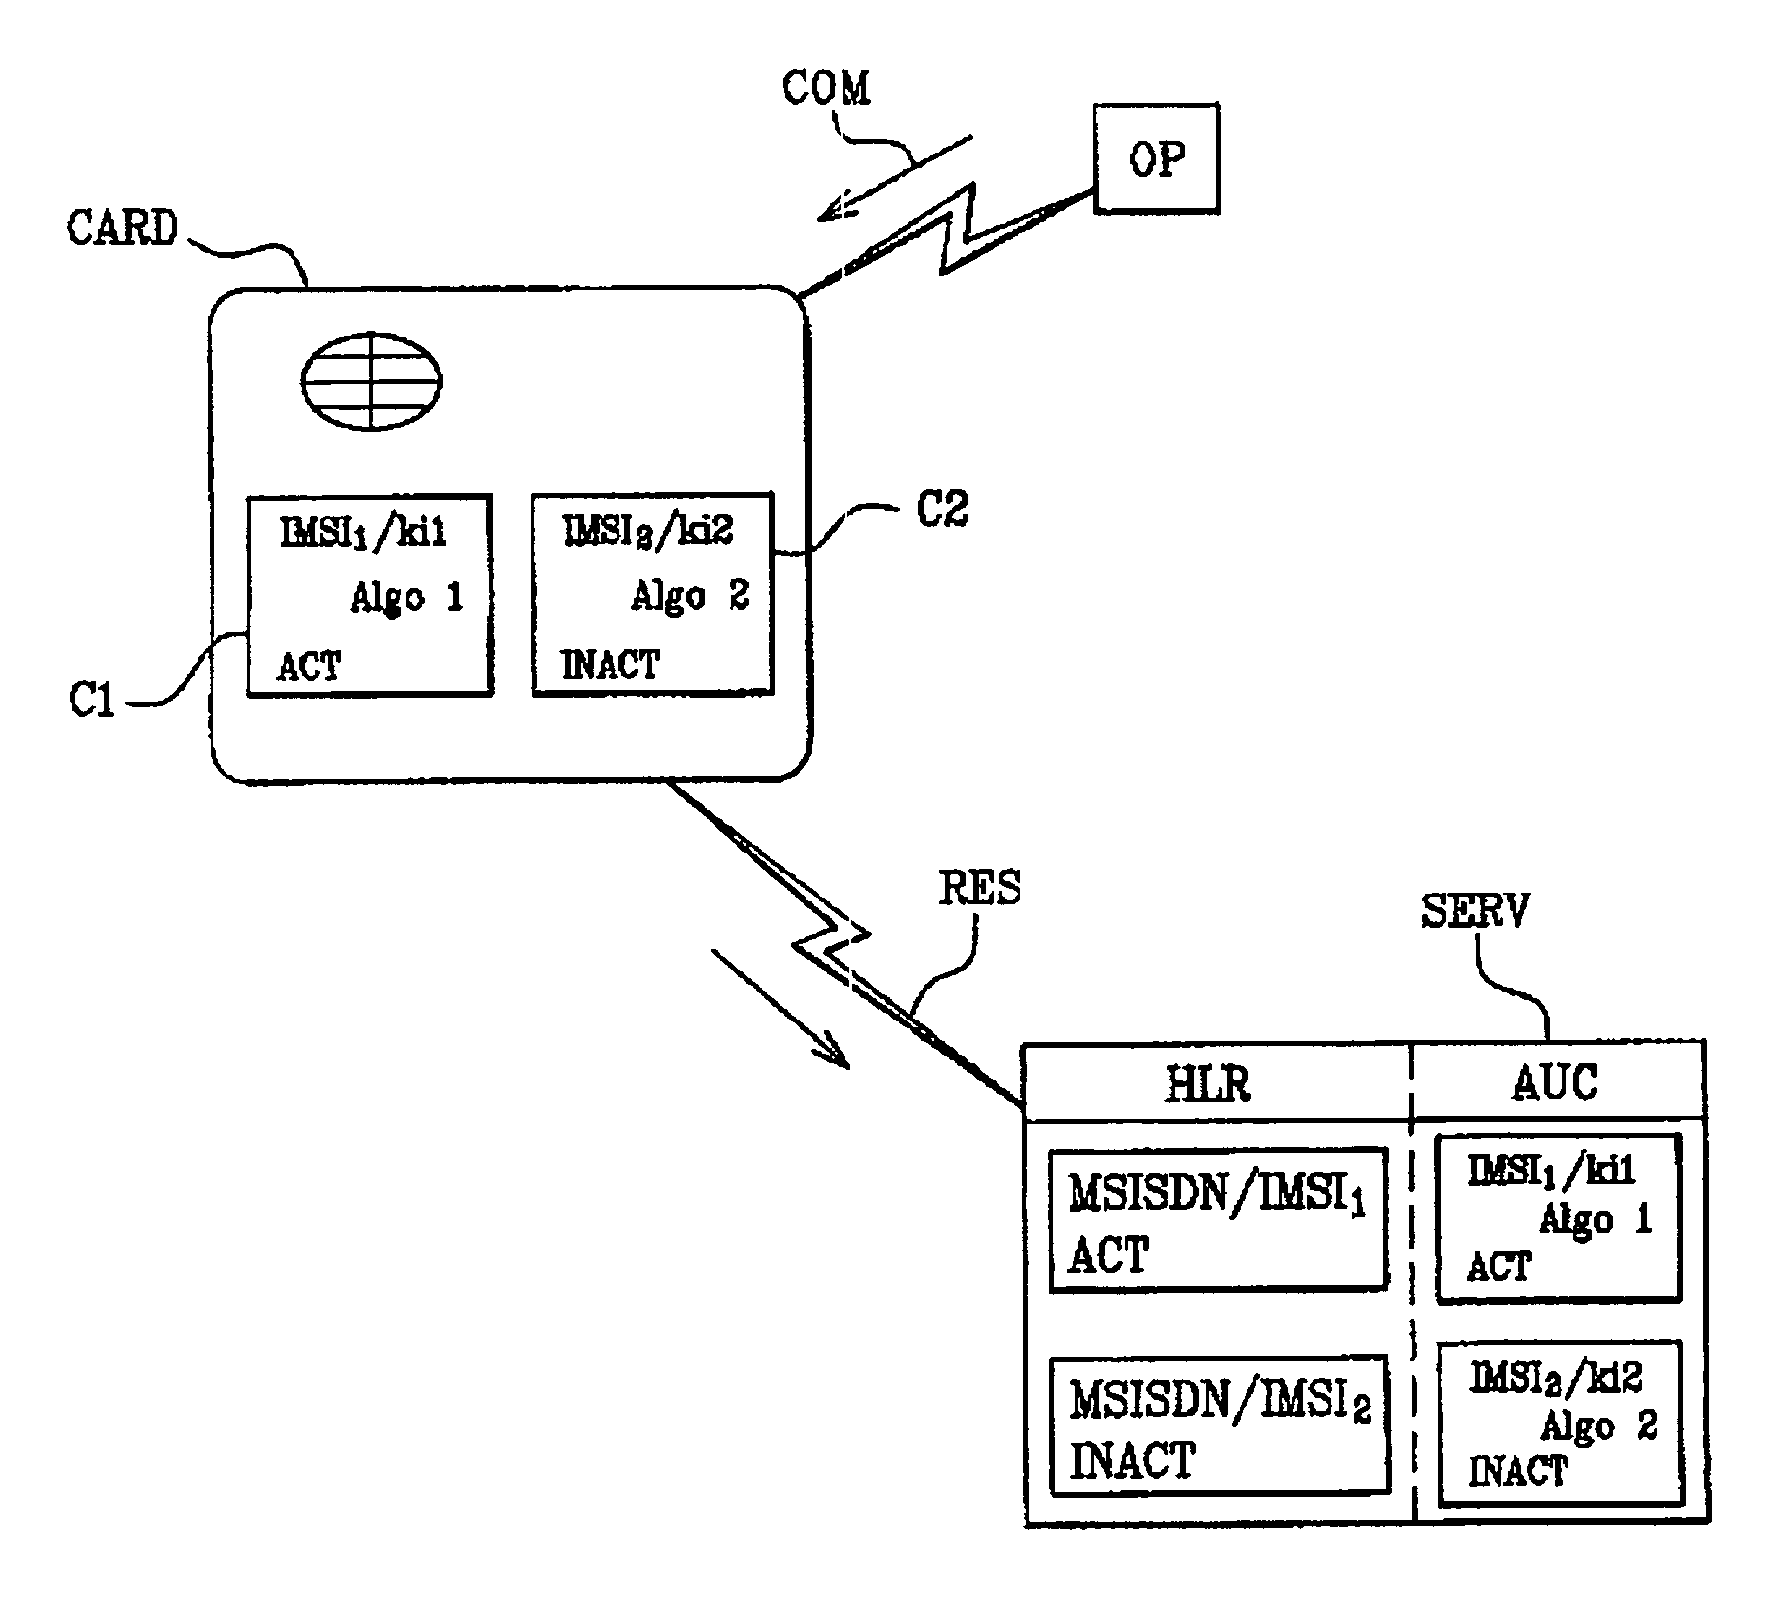 Method of updating an authentication algorithm in a computer system